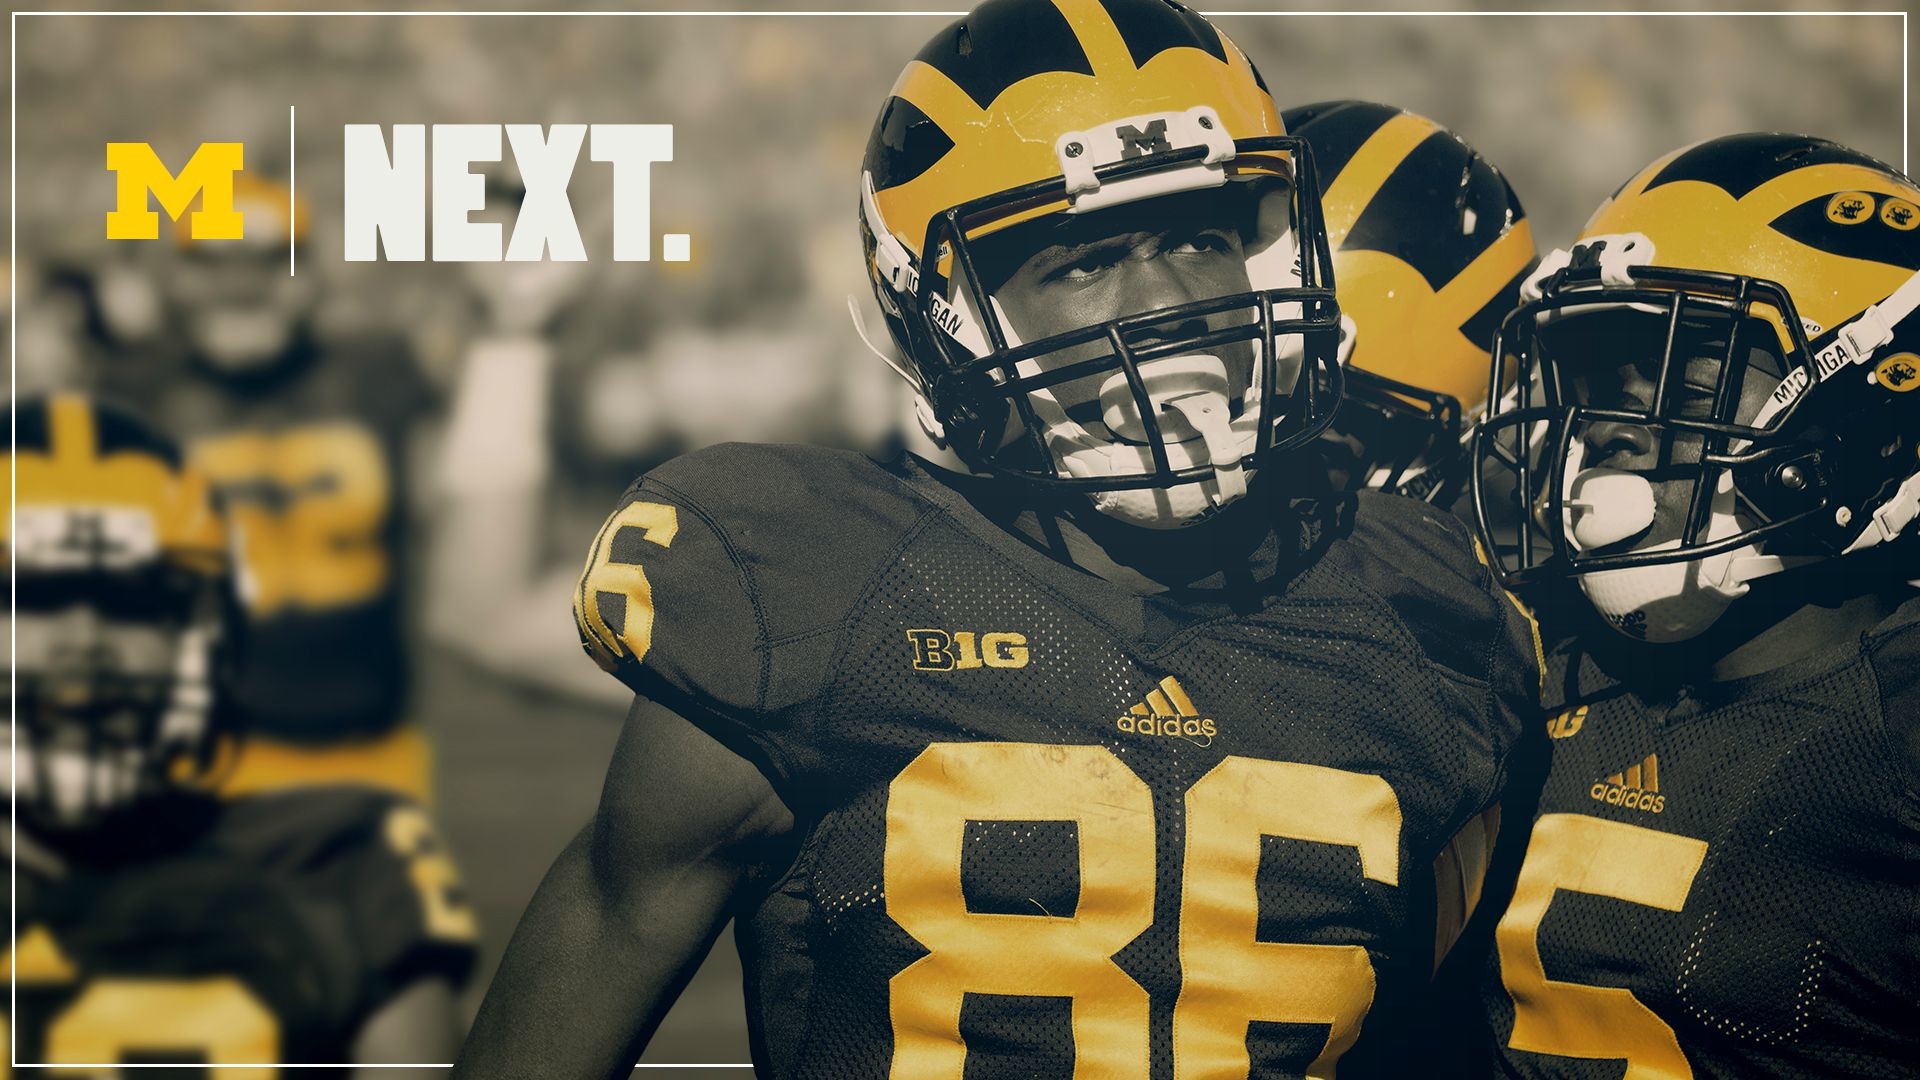 1920x1080 Michigan Wolverines Football Wallpapers Group 1920Ã1080 Michigan Wolverines  Football Wallpapers (34 Wallpapers)